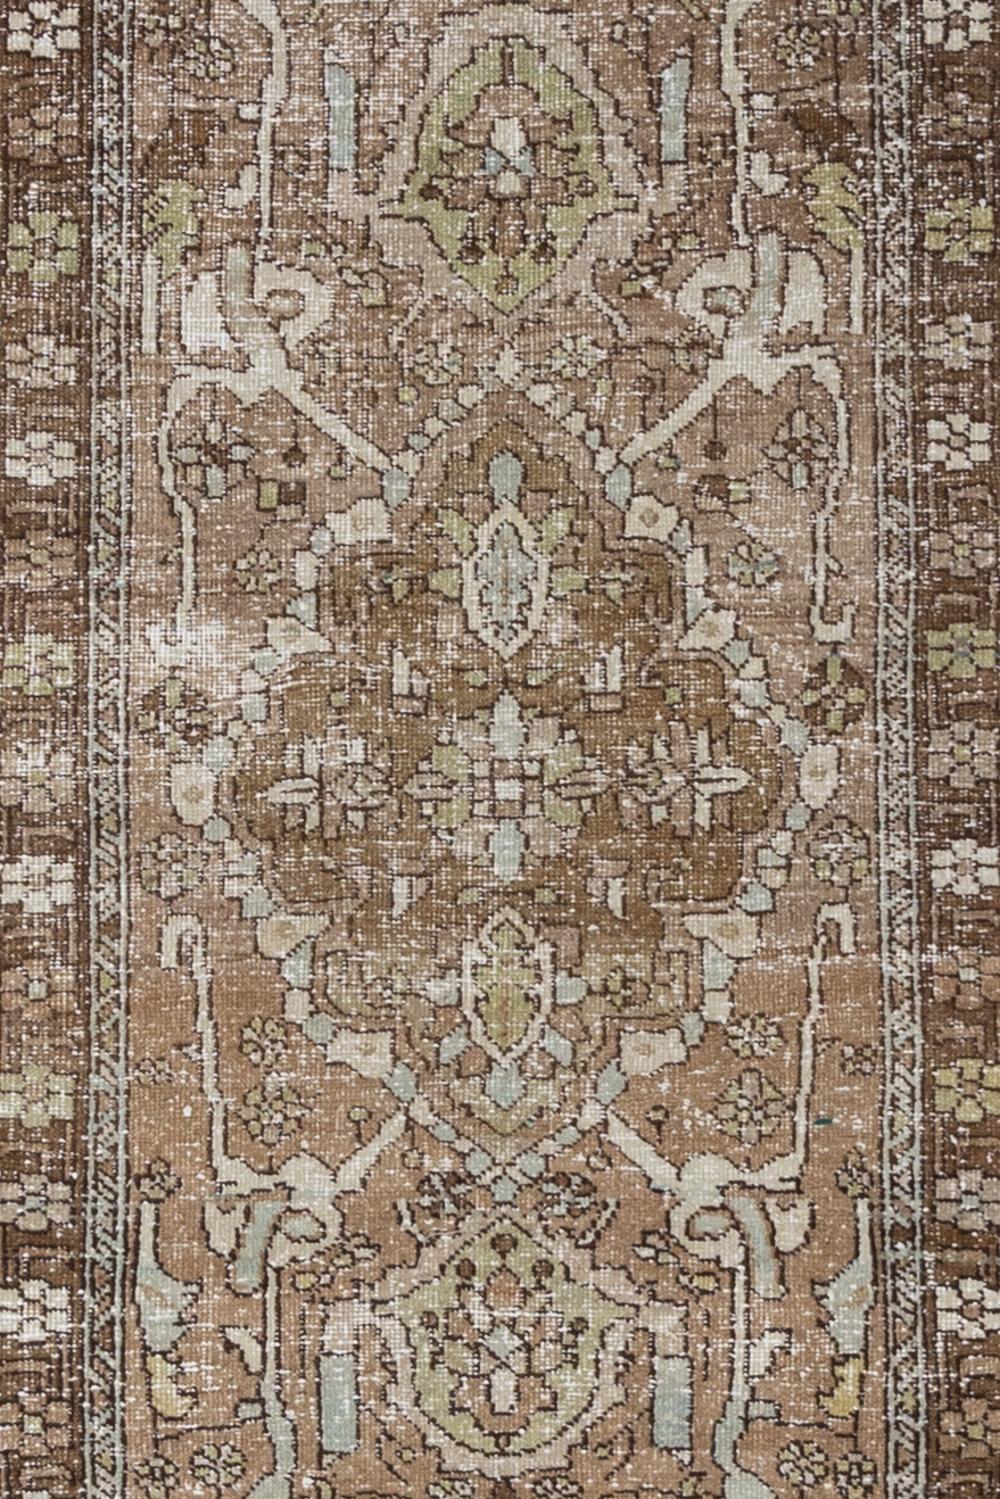 Age: 1940's

Colors: mocha, blue, chartreuse, tan, off white

Pile: low

Wear Notes: 4

Material: wool on cotton

Vintage Persian runner with a warm tan field and earthy accents. Safe for high traffic. 

Vintage rugs are made by hand